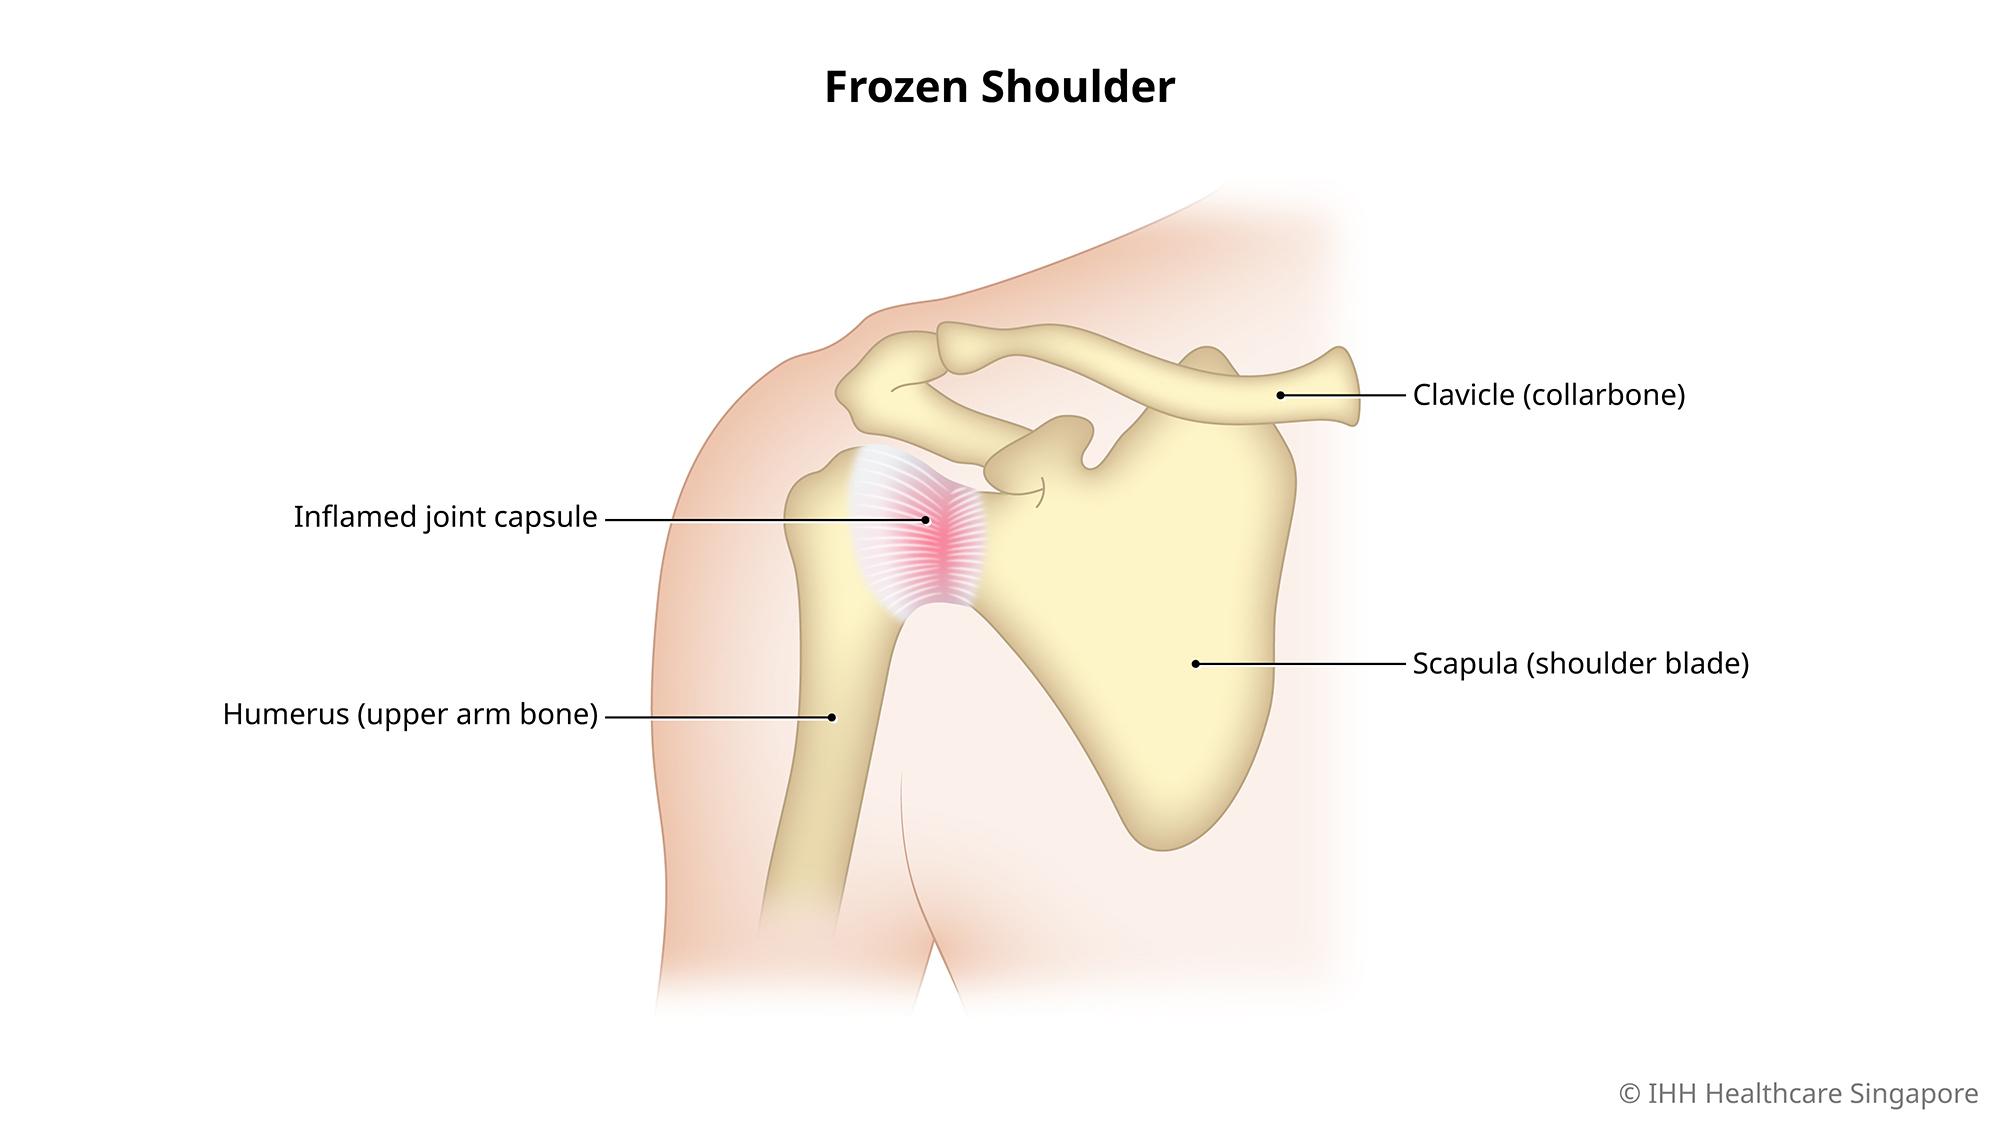 Frozen shoulder, also known as adhesive capsulitis